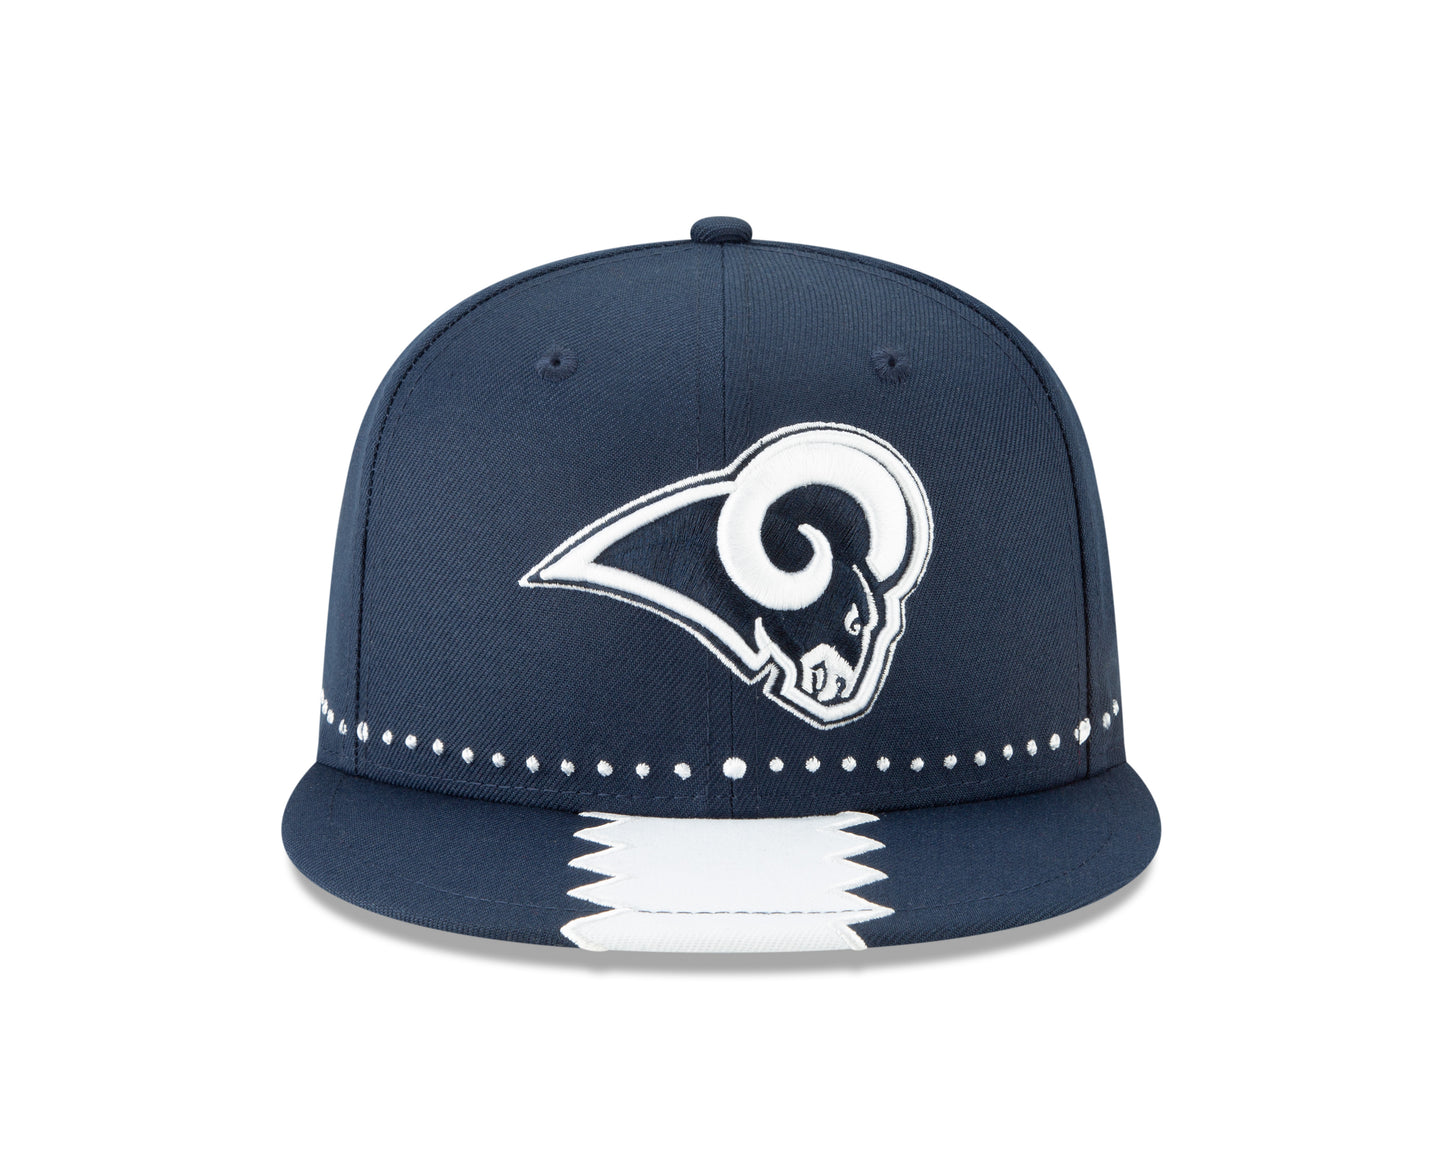 Los Angeles Rams New Era NFL Official Draft On-Stage 9FIFTY Snapback Hat